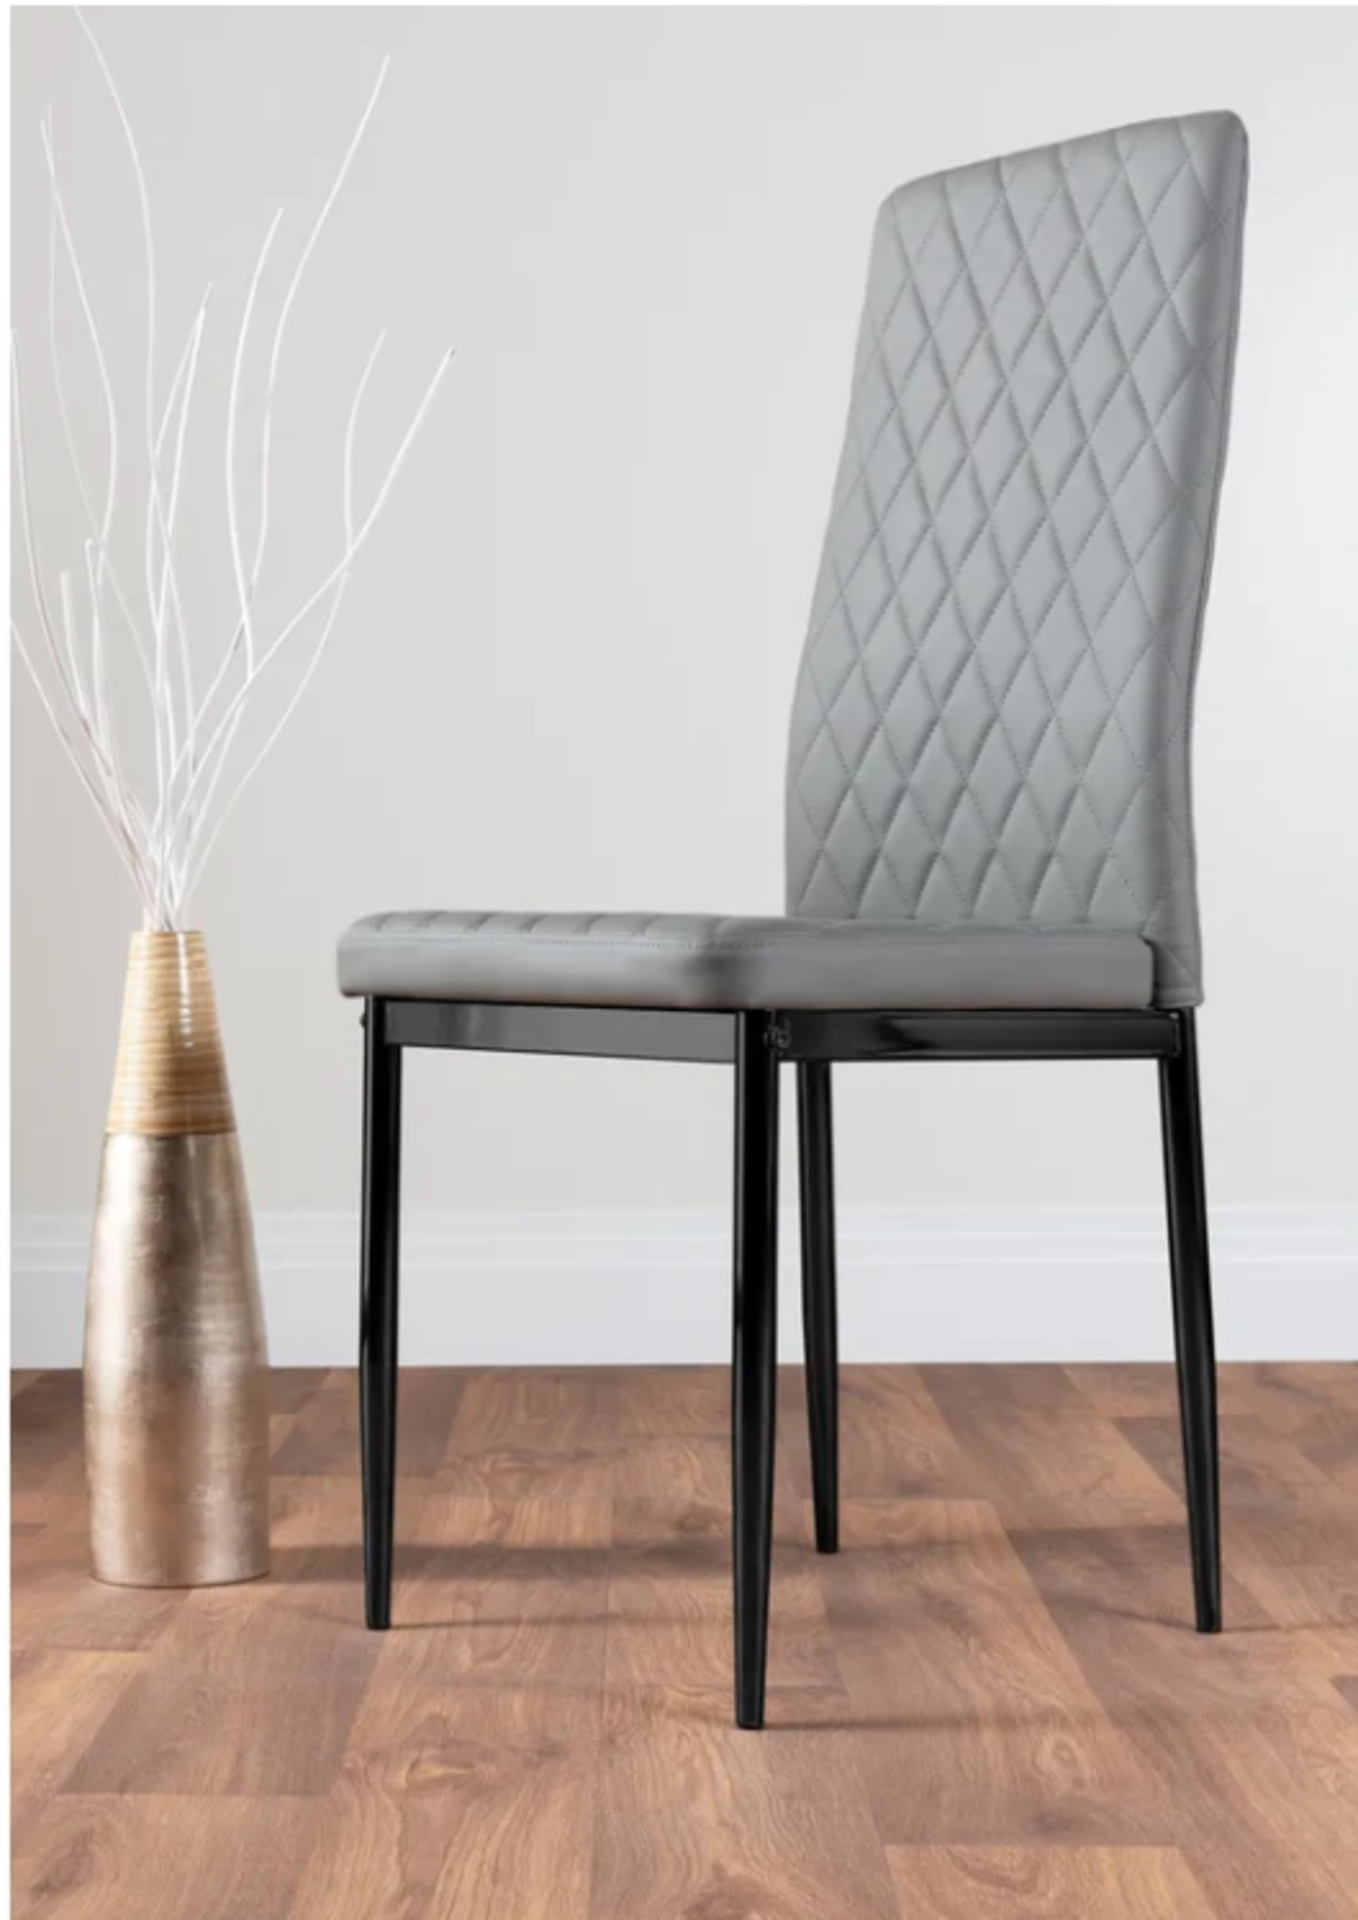 Chowchilla Faux Leather Modern Tall Back Dining Chairs Set with Metal Legs & Diamond Stitching set